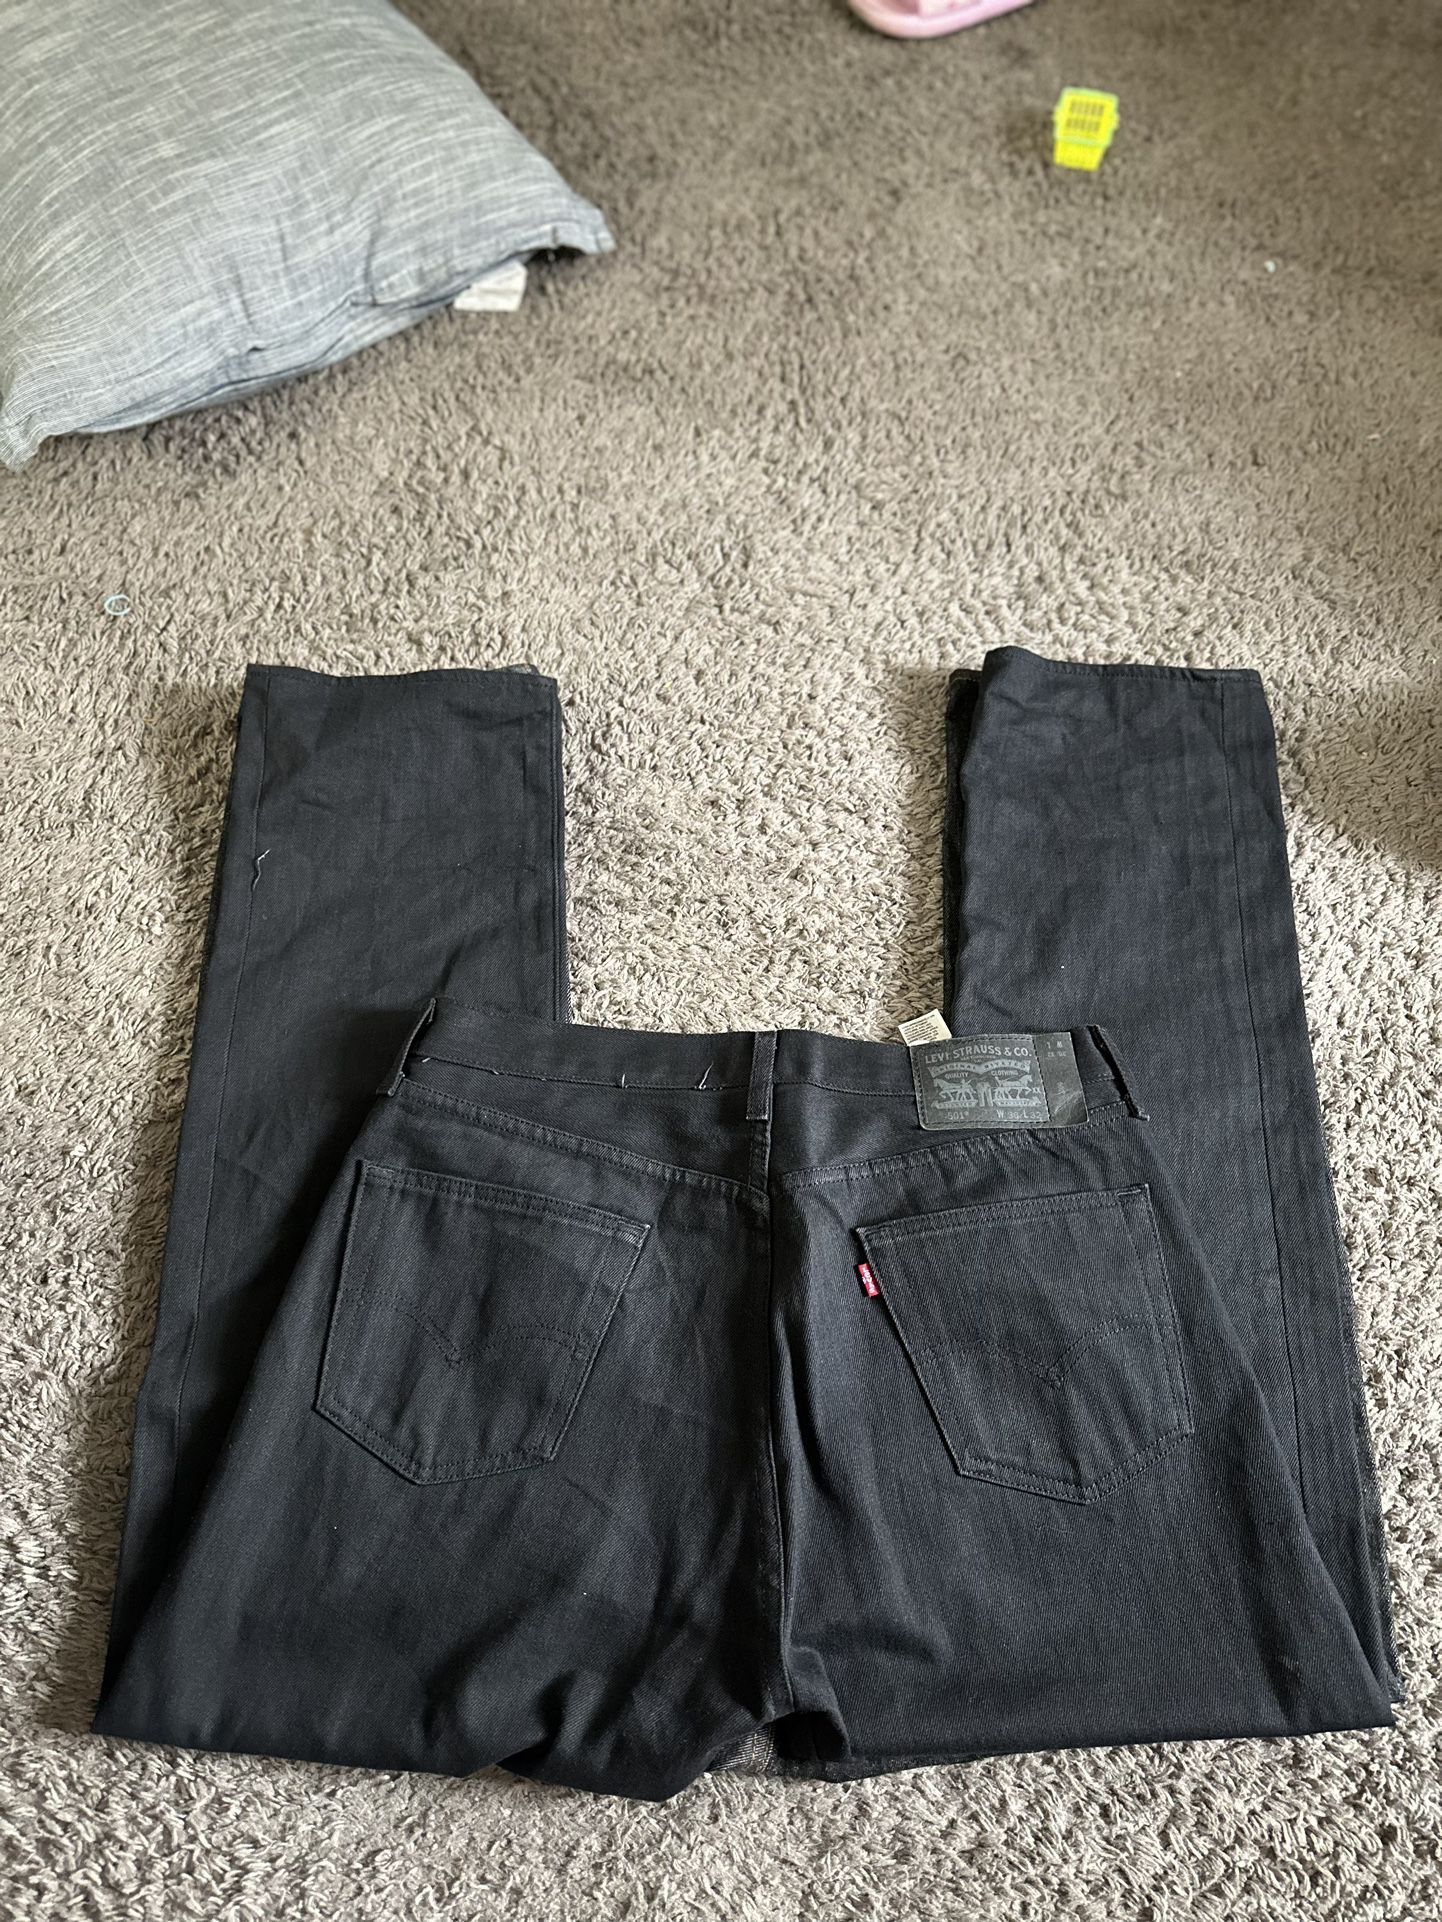 Pair Of Levi’s Jeans 